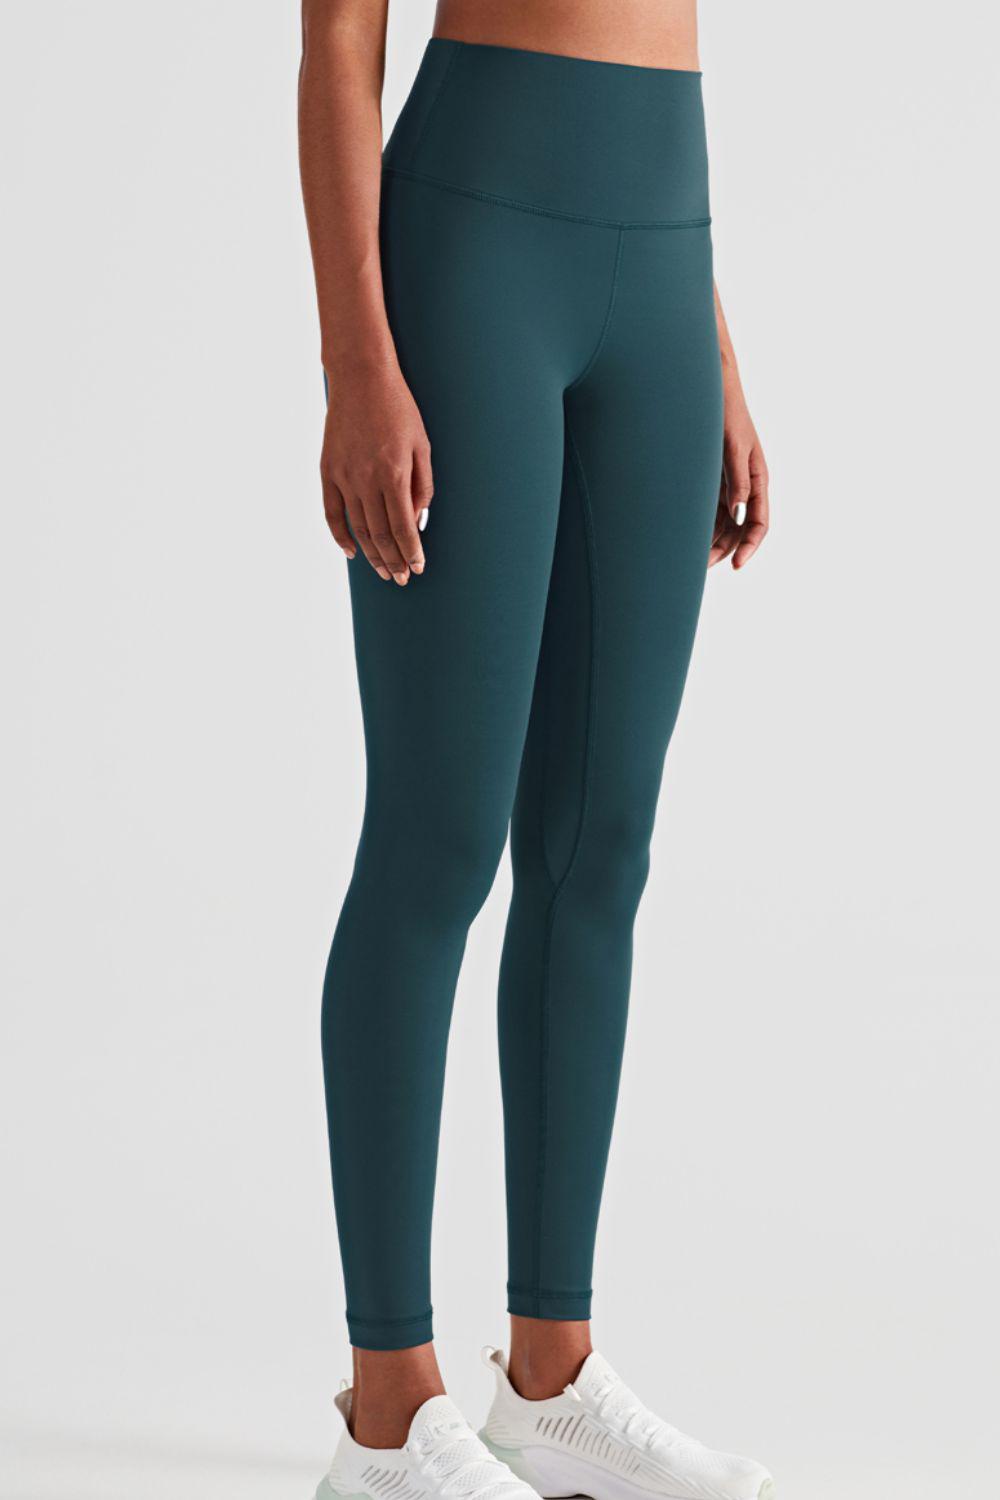 Change Your Thoughts Yoga Leggings BLUE ZONE PLANET